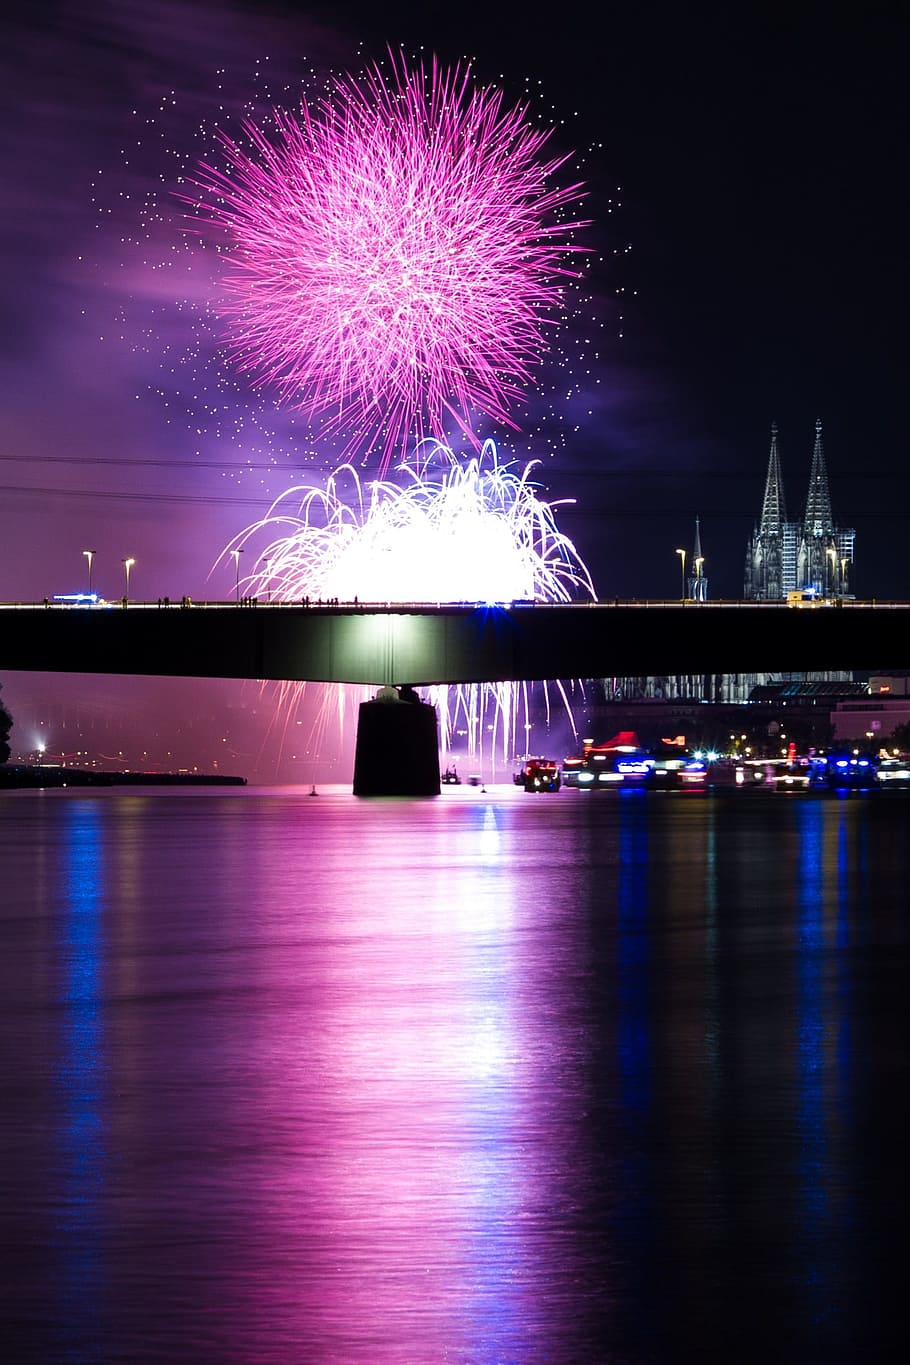 fireworks display, bridge, nighttime, new year's eve, fireworks, night, pyrotechnics, sylvester, rocket, new year's day